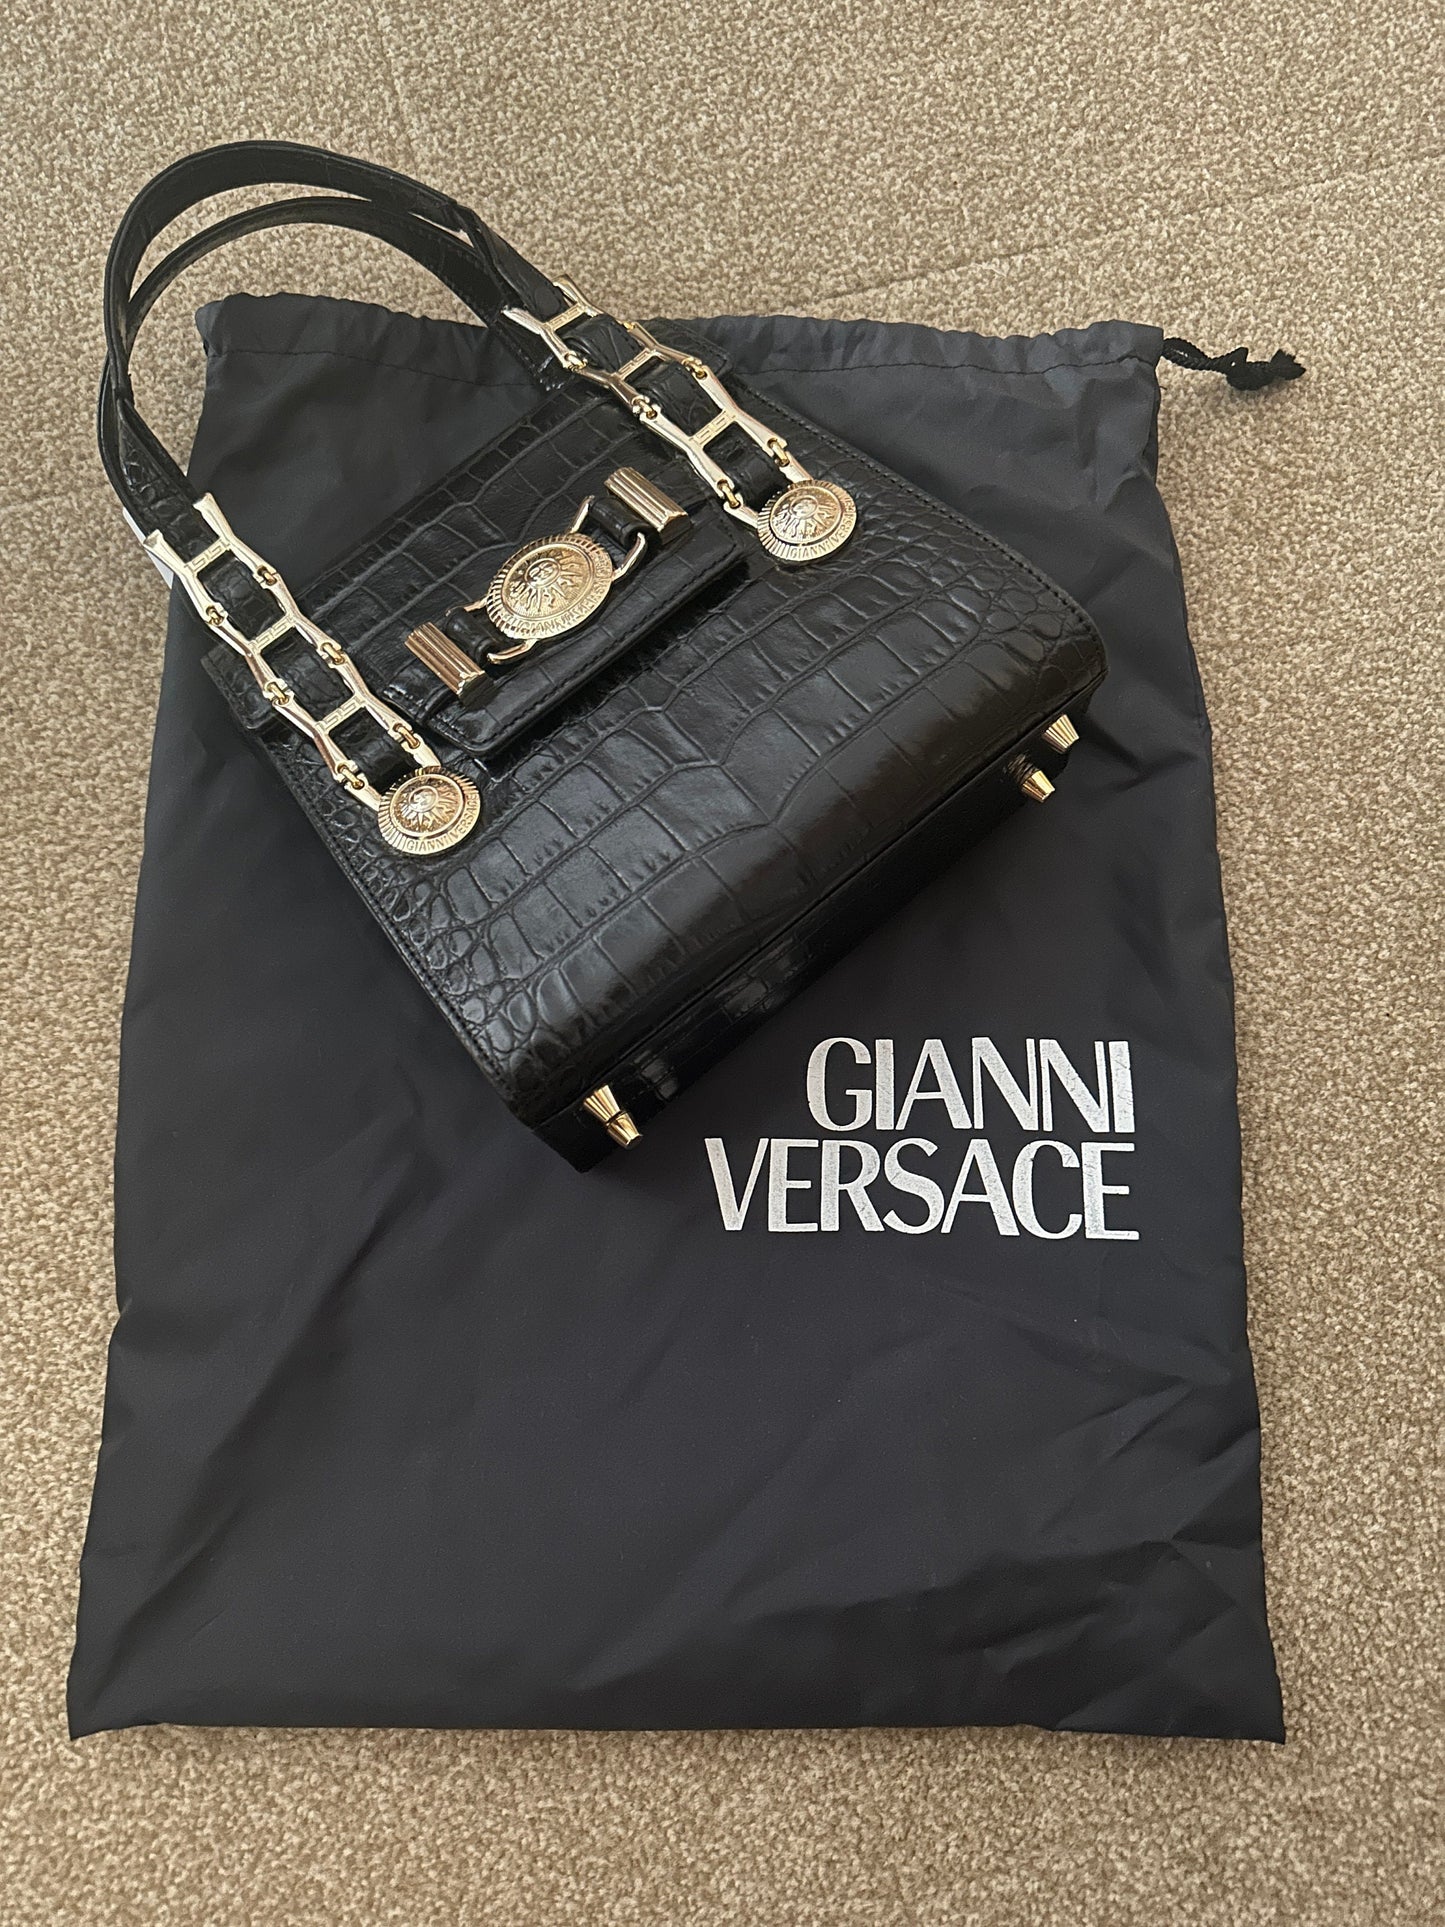 Like New! VERSACE VINTAGE 100% Authentic Genuine, Leather Embossed Handbag, Black, Great Condition, Grade A